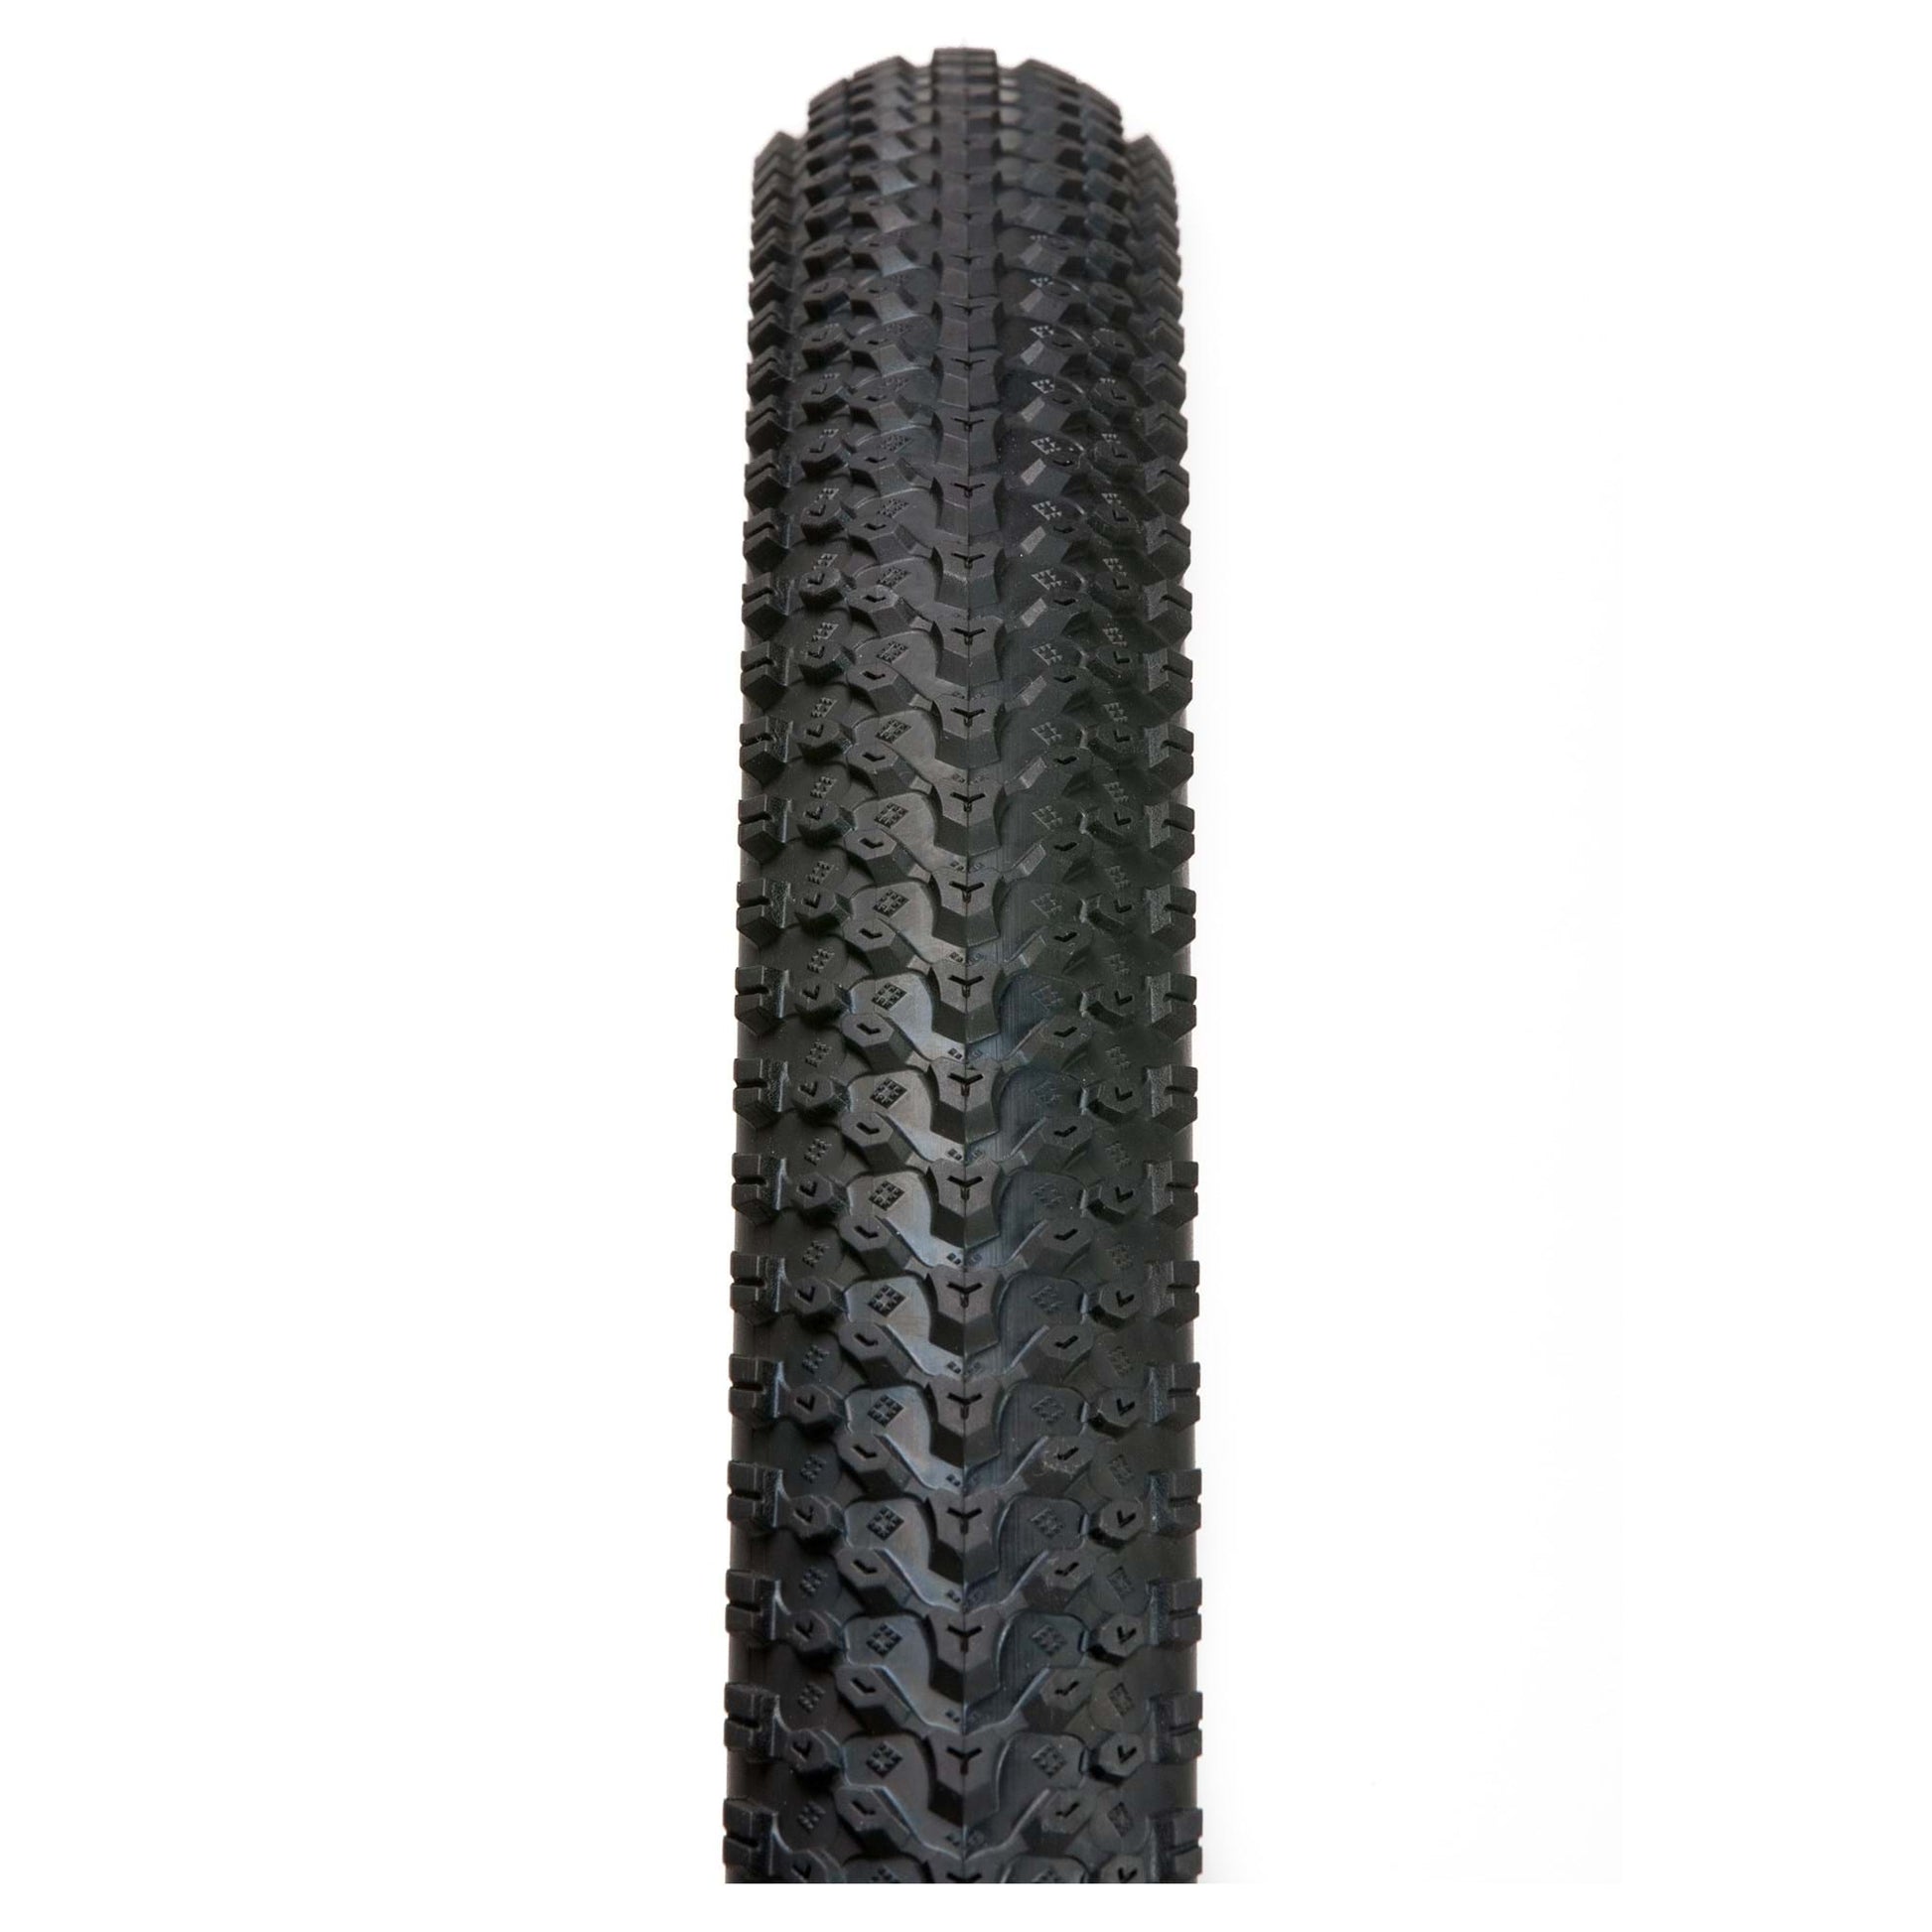 PANARACER COMET HARD PACK 26" WIRED TYRE